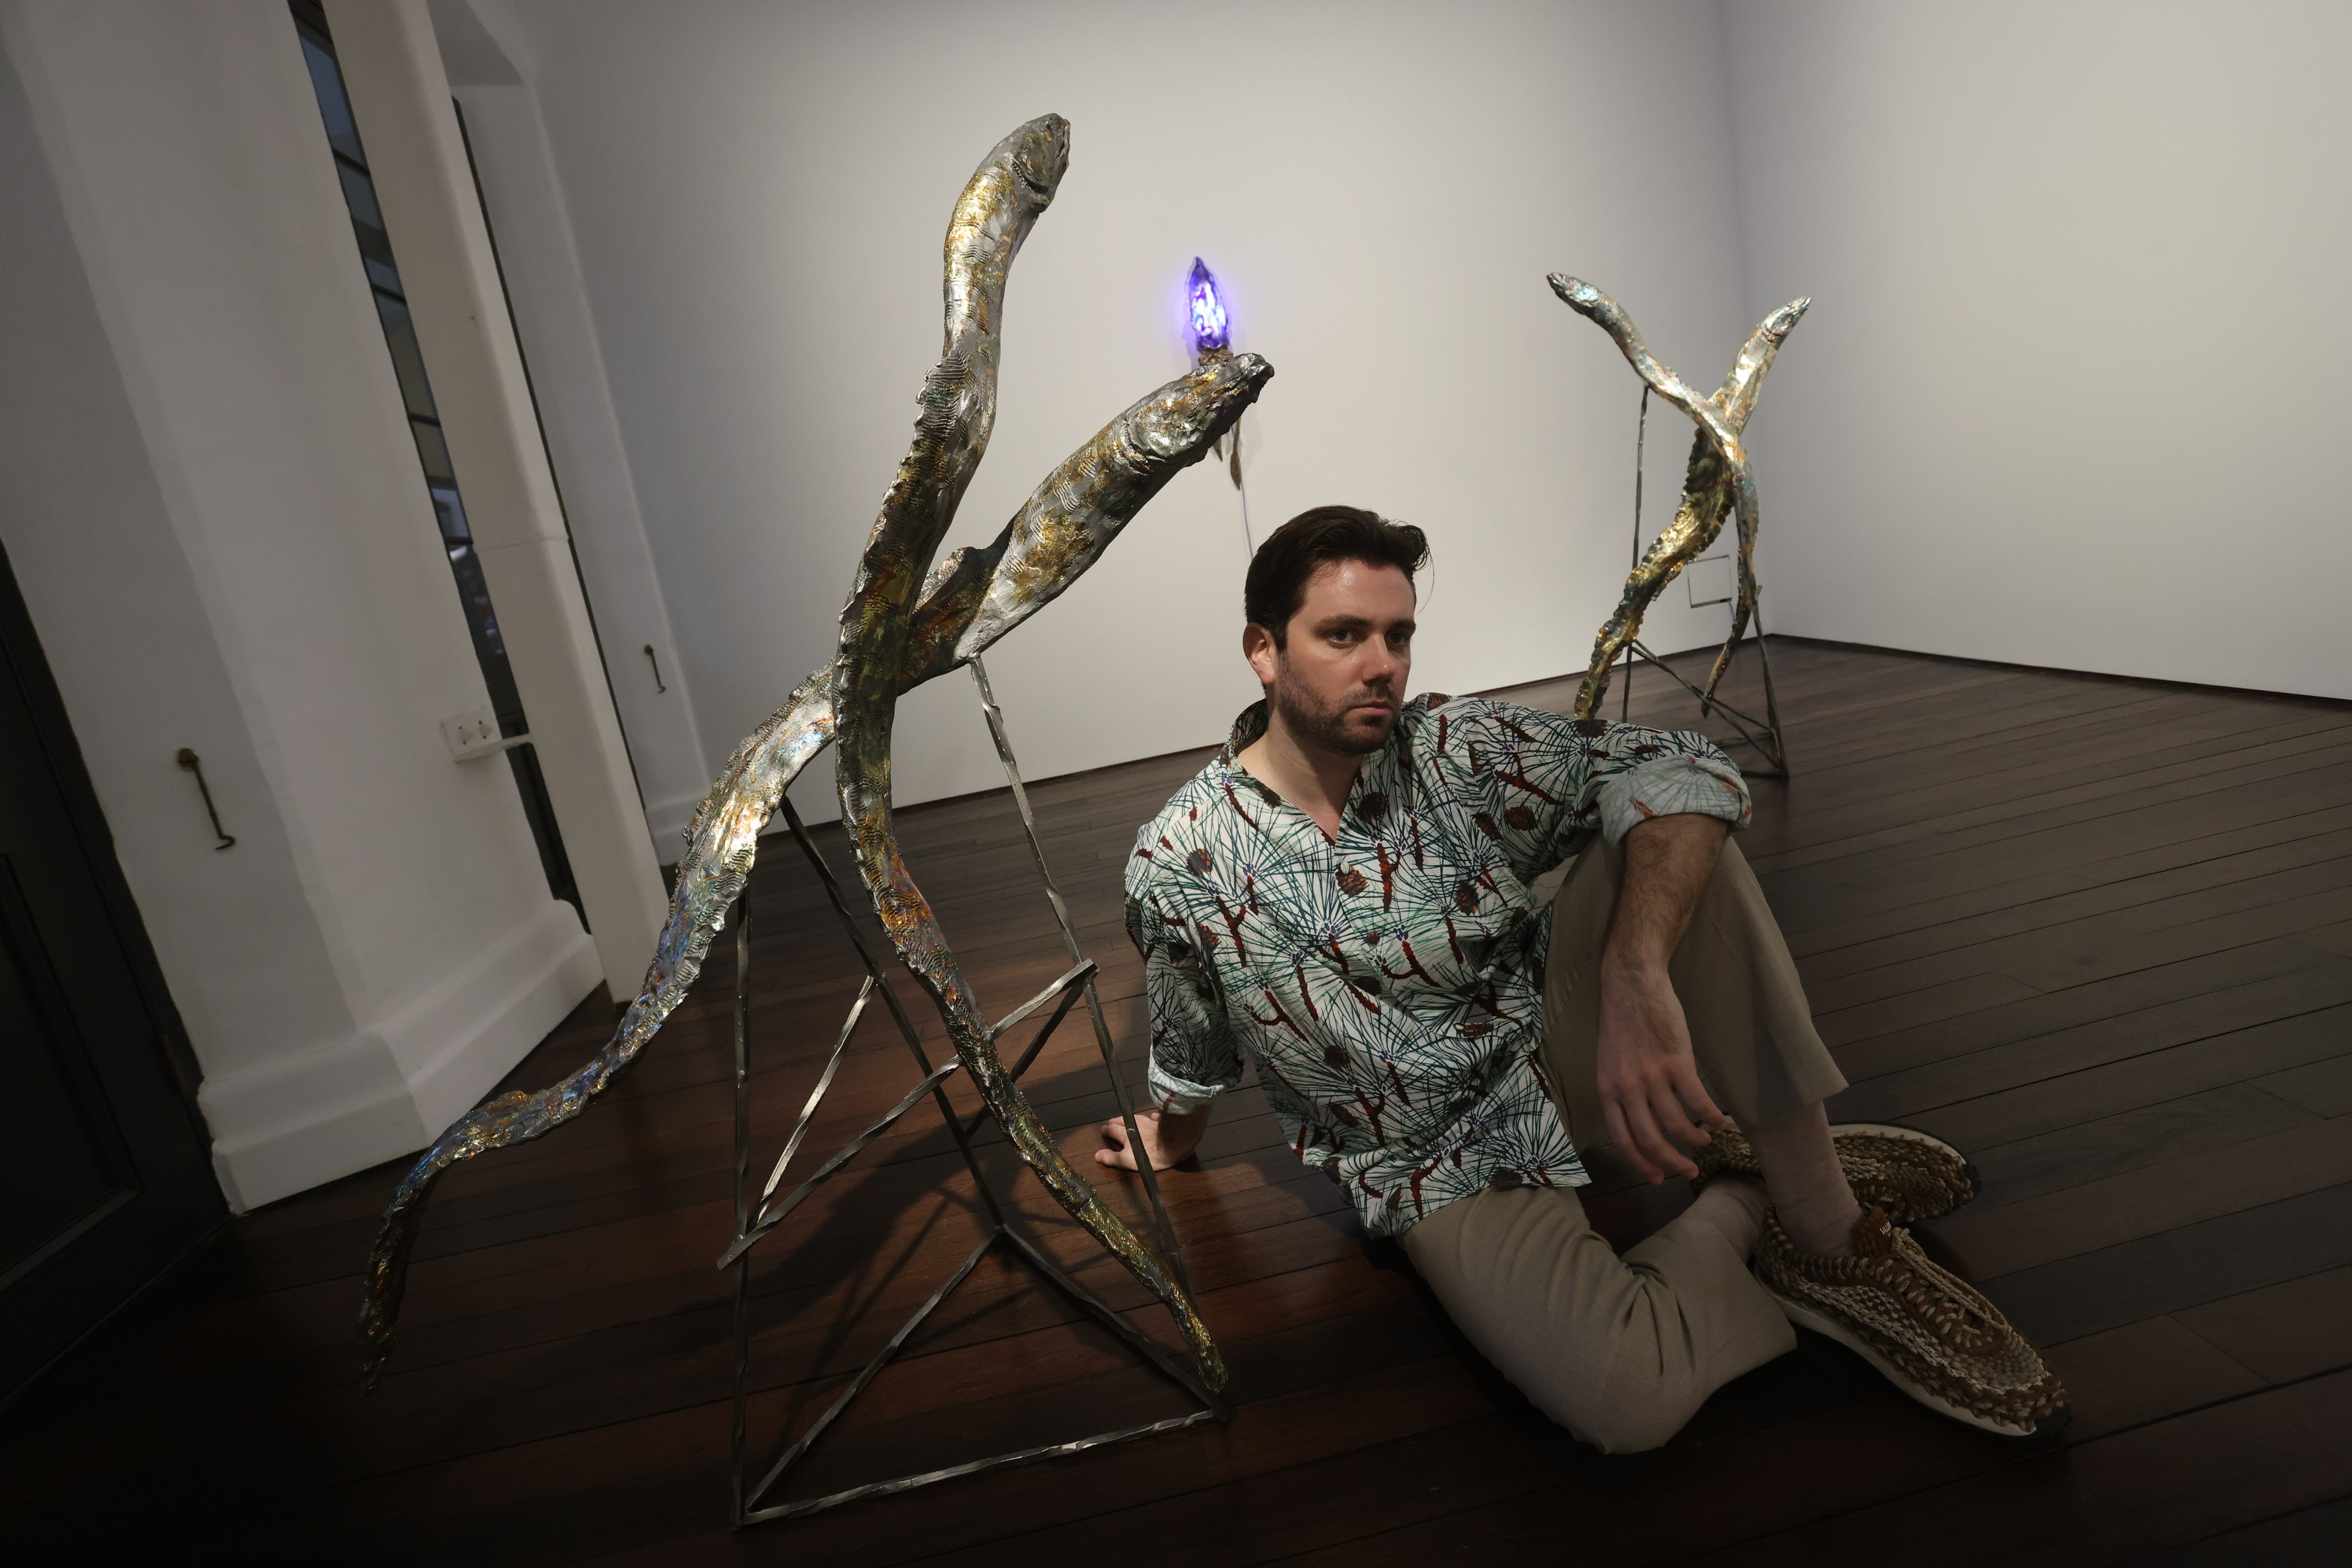 French artist Jean-Marie Appriou with some of his sea-life sculptures at his exhibition “Magnetic” at Tai Kwun, Hong Kong. Photo: Jonathan Wong